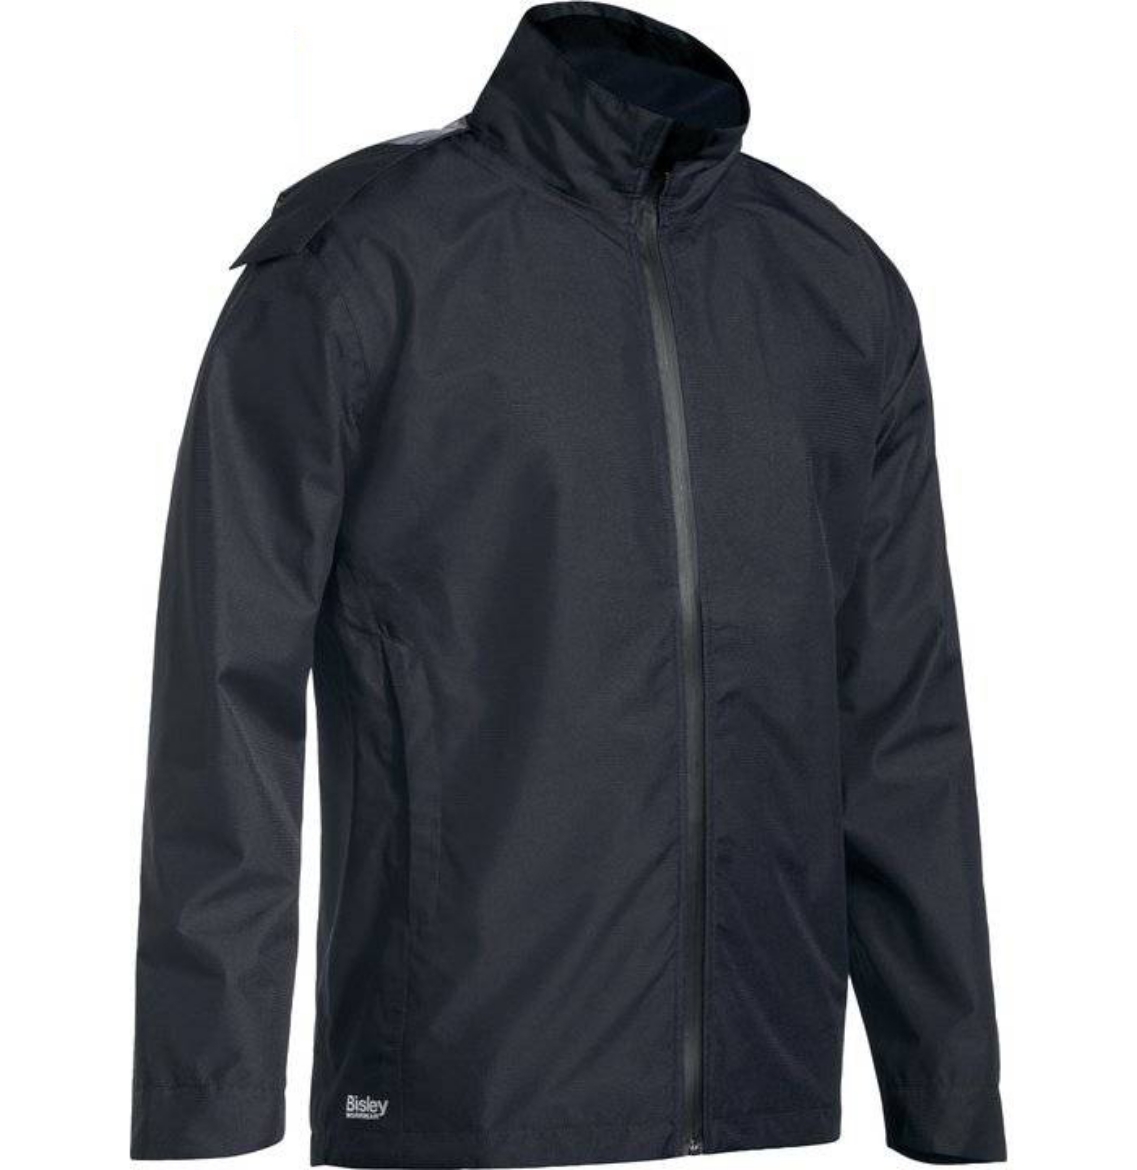 Picture of Bisley, Lightweight Mini Ripstop Rain Jacket With Concealed Hood